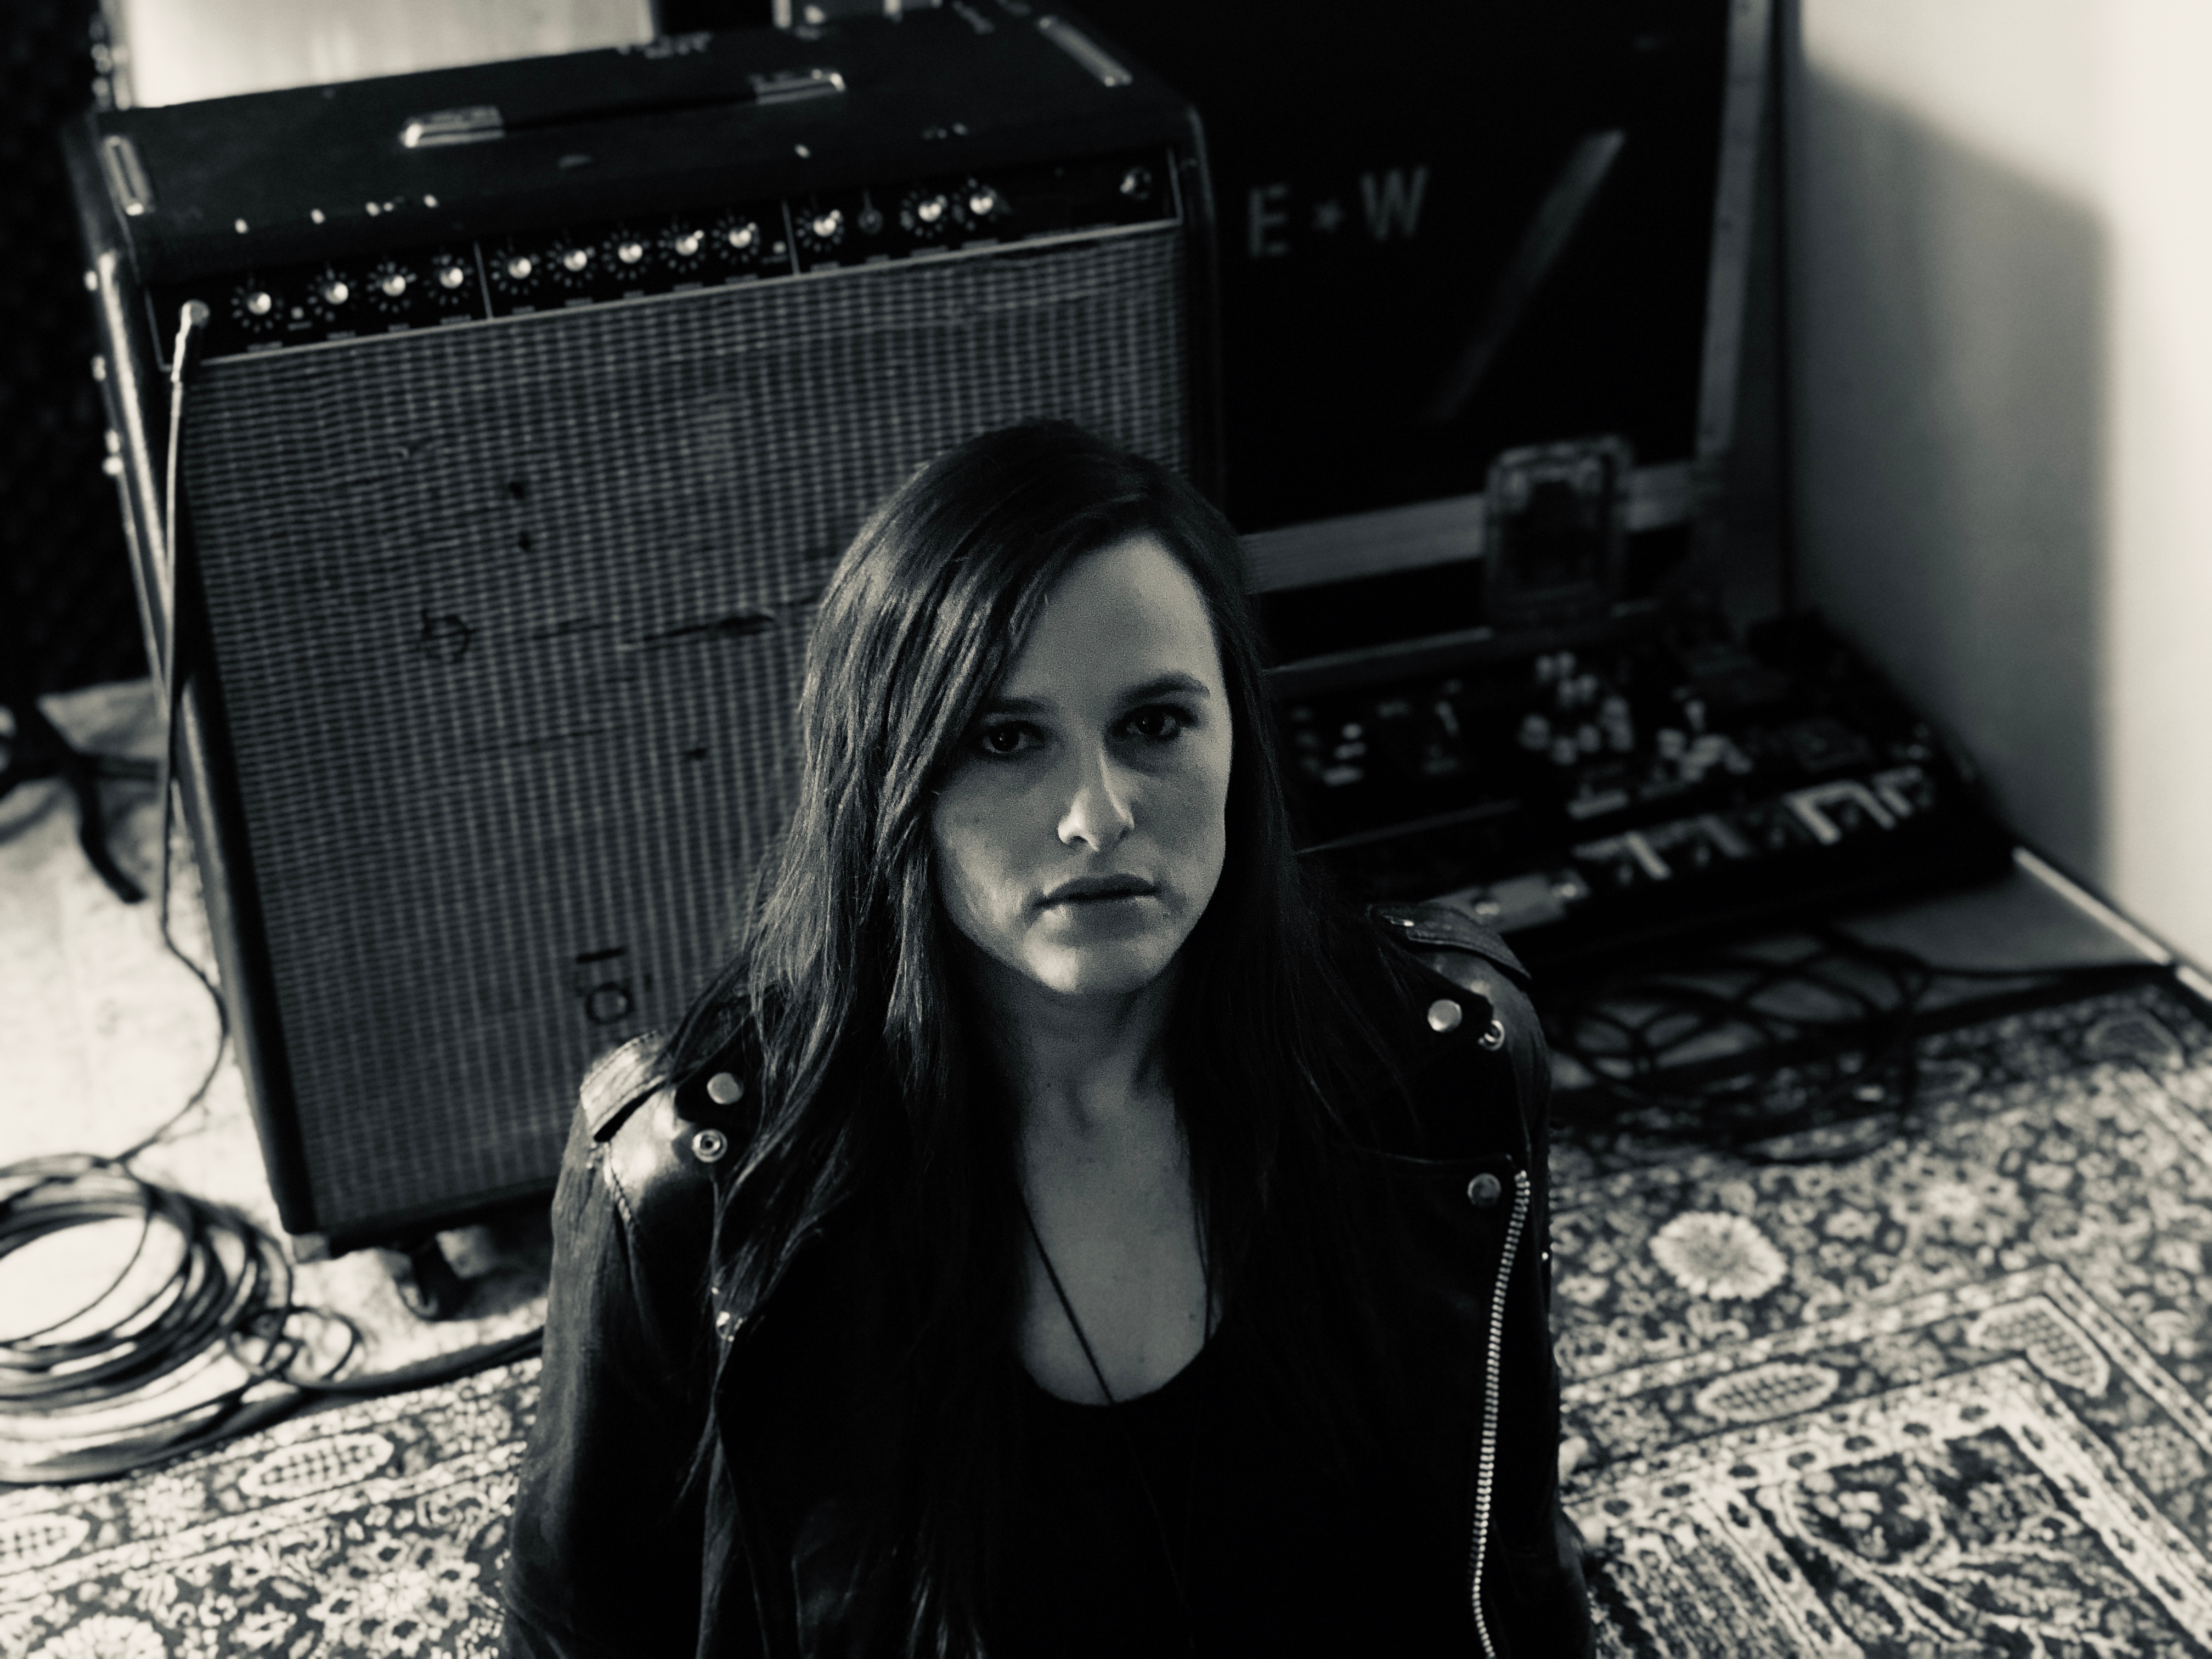 The Epiphone Interview Emily Wolfe